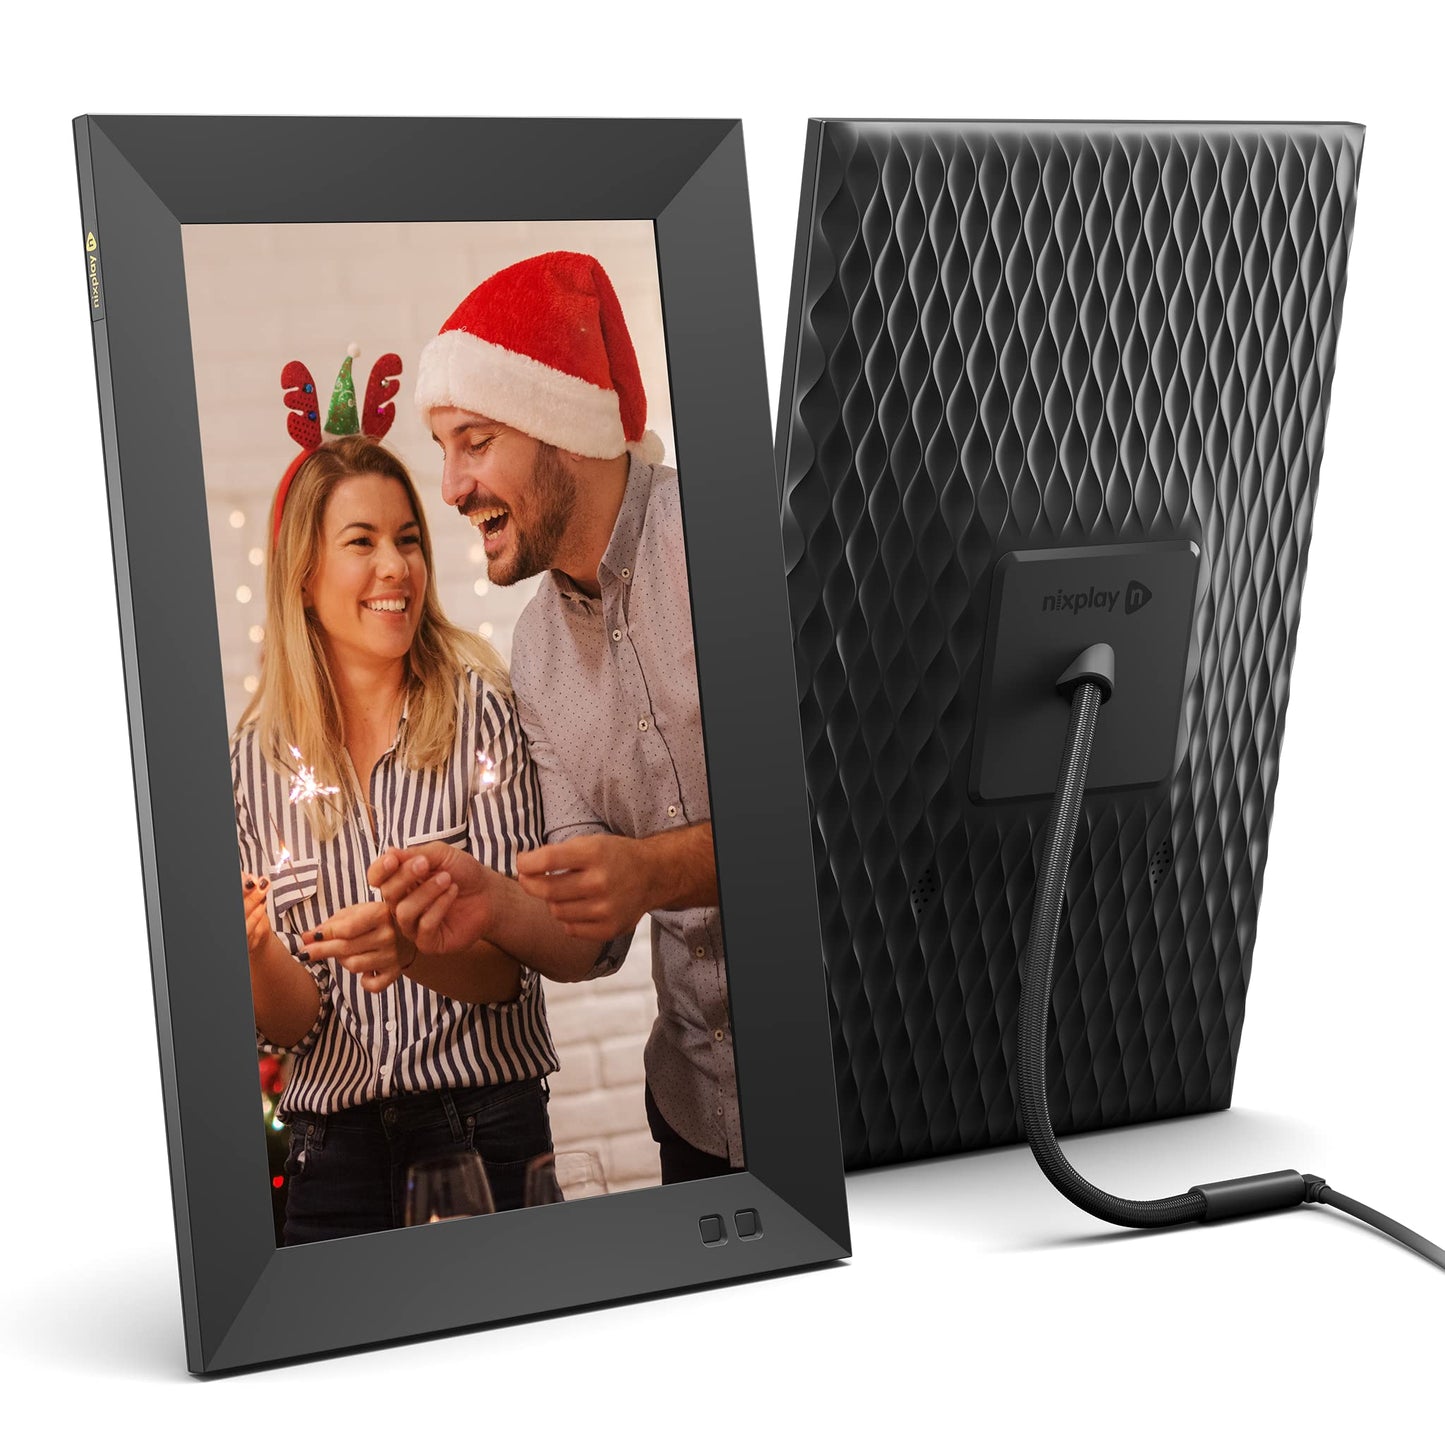 Nixplay 9.7 inch Smart Digital Photo Frame with WiFi and 2K Display (W10G) - Metal - Share Photos and Videos Instantly via Email or App